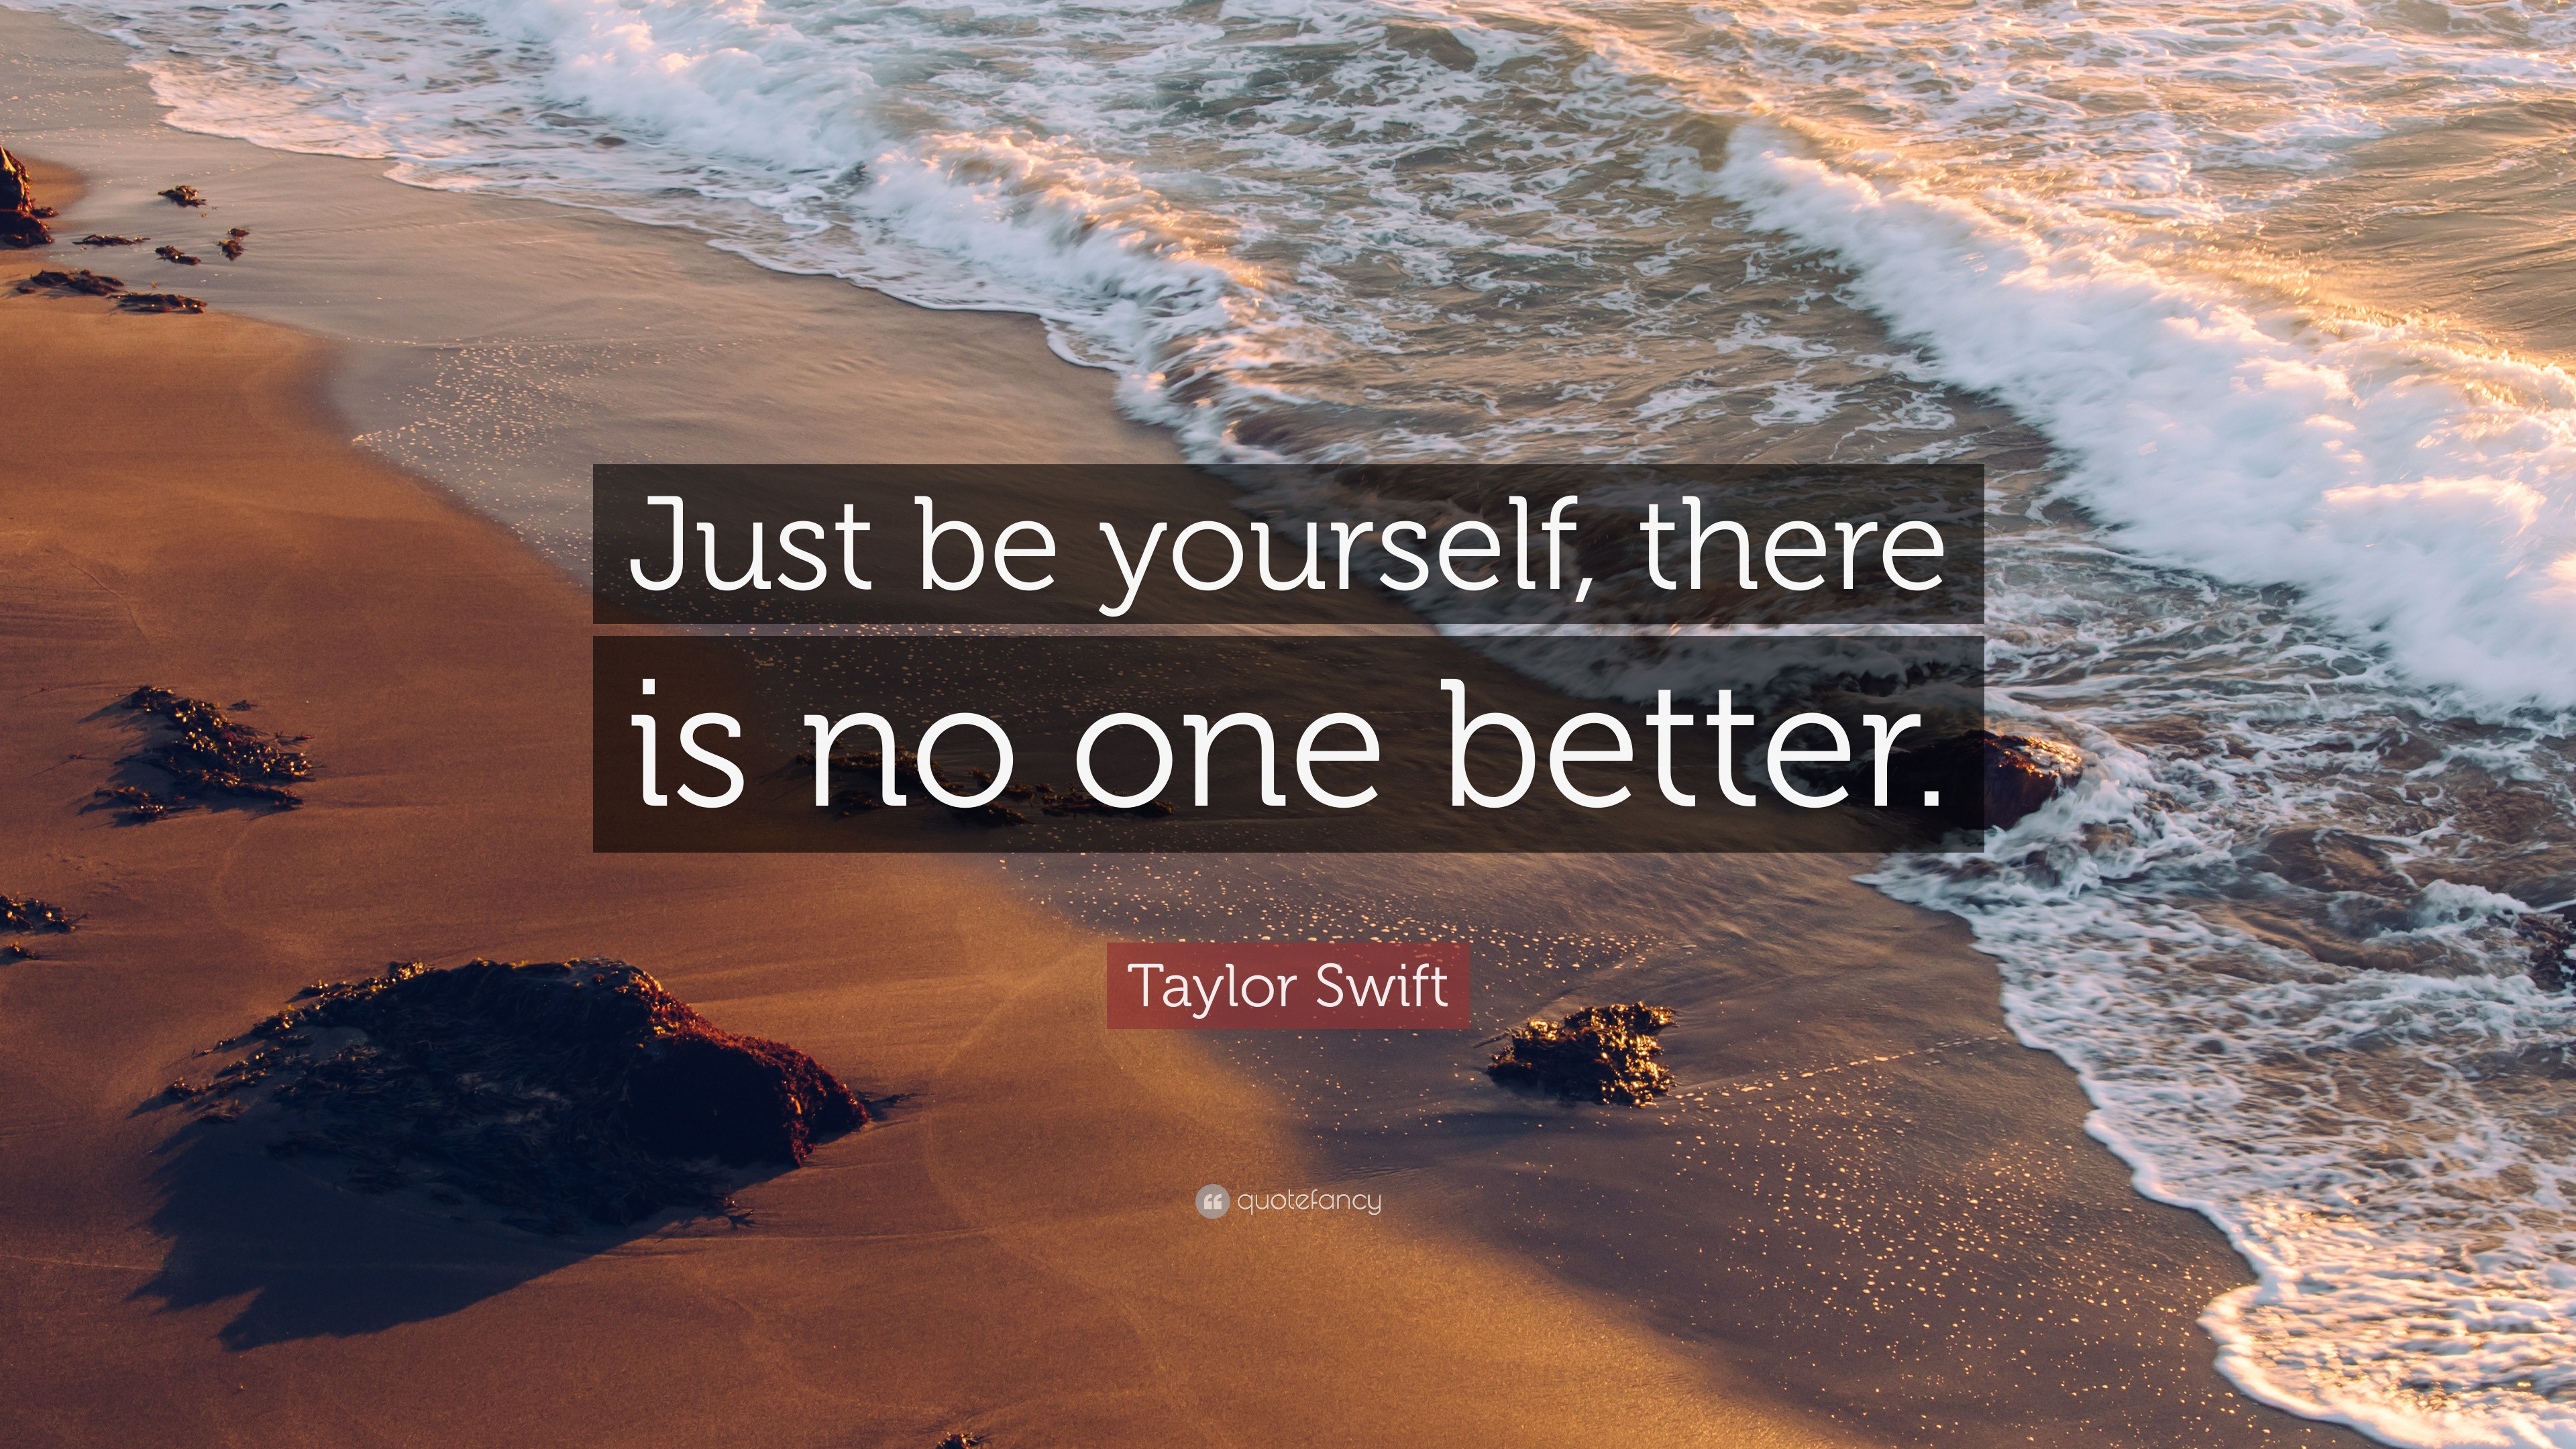 Taylor Swift Quote: “Just be yourself, there is no one better.” (22 ...